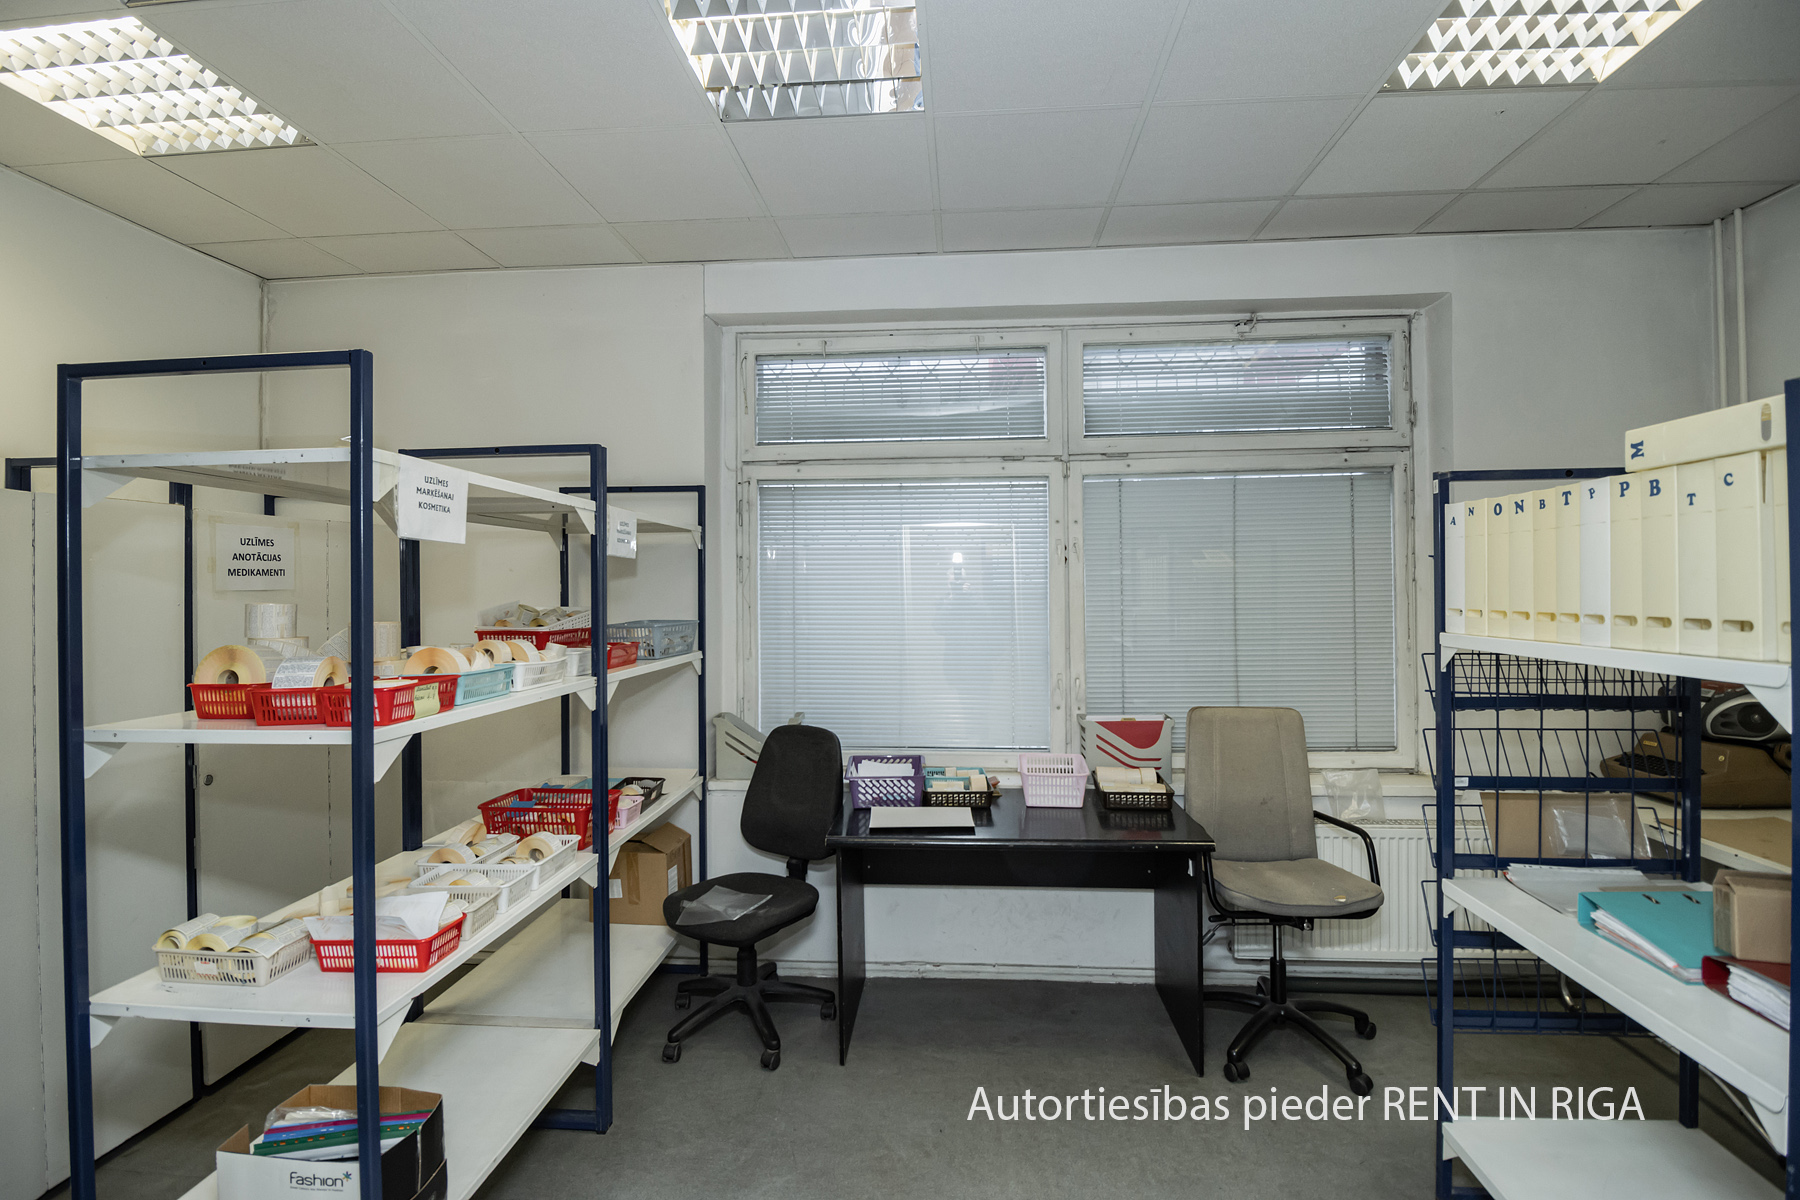 Property building for rent, Rasas street - Image 1